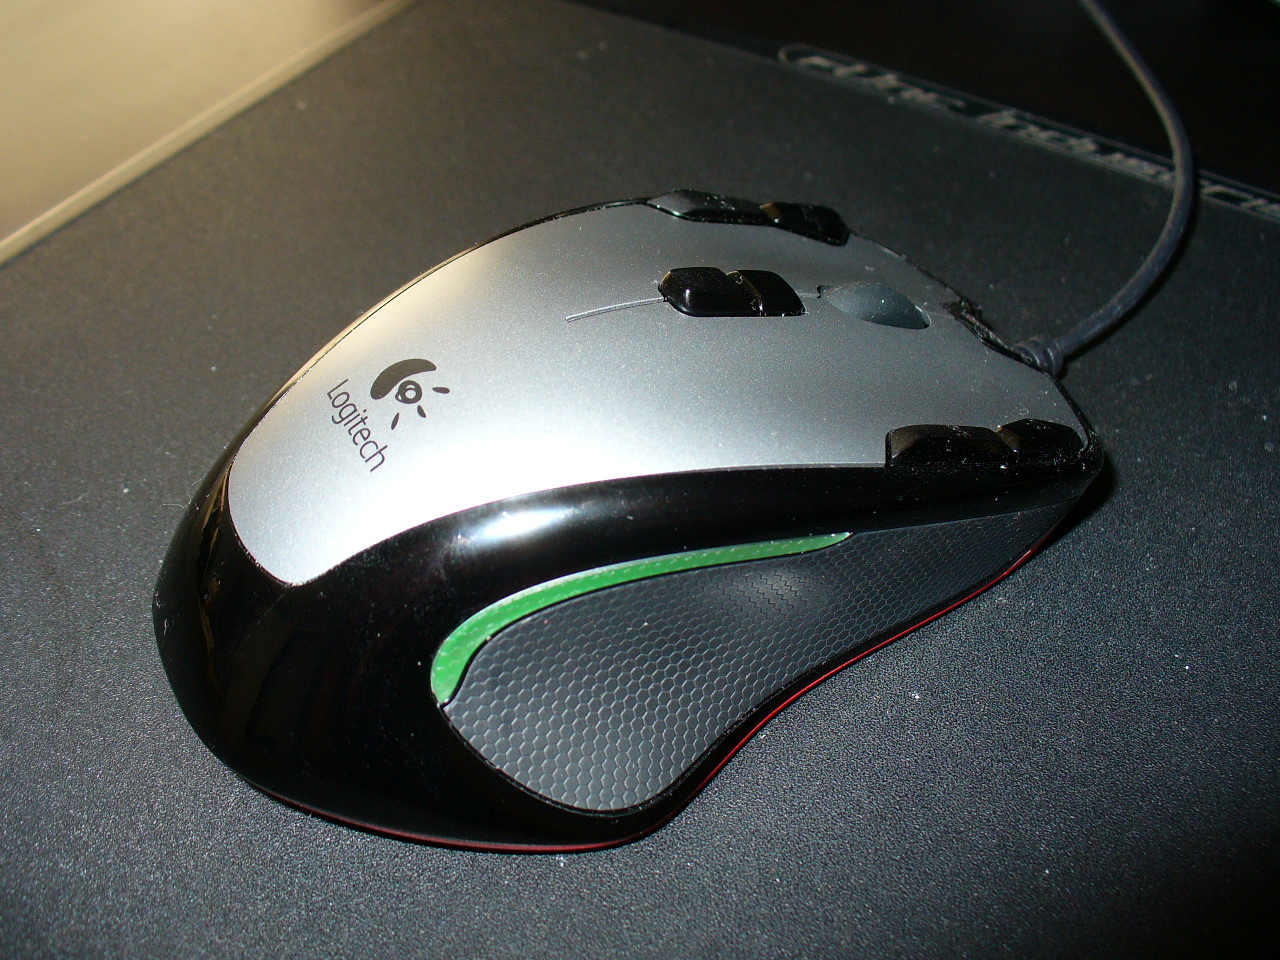 Logitech Gaming Mouse G300 Specs